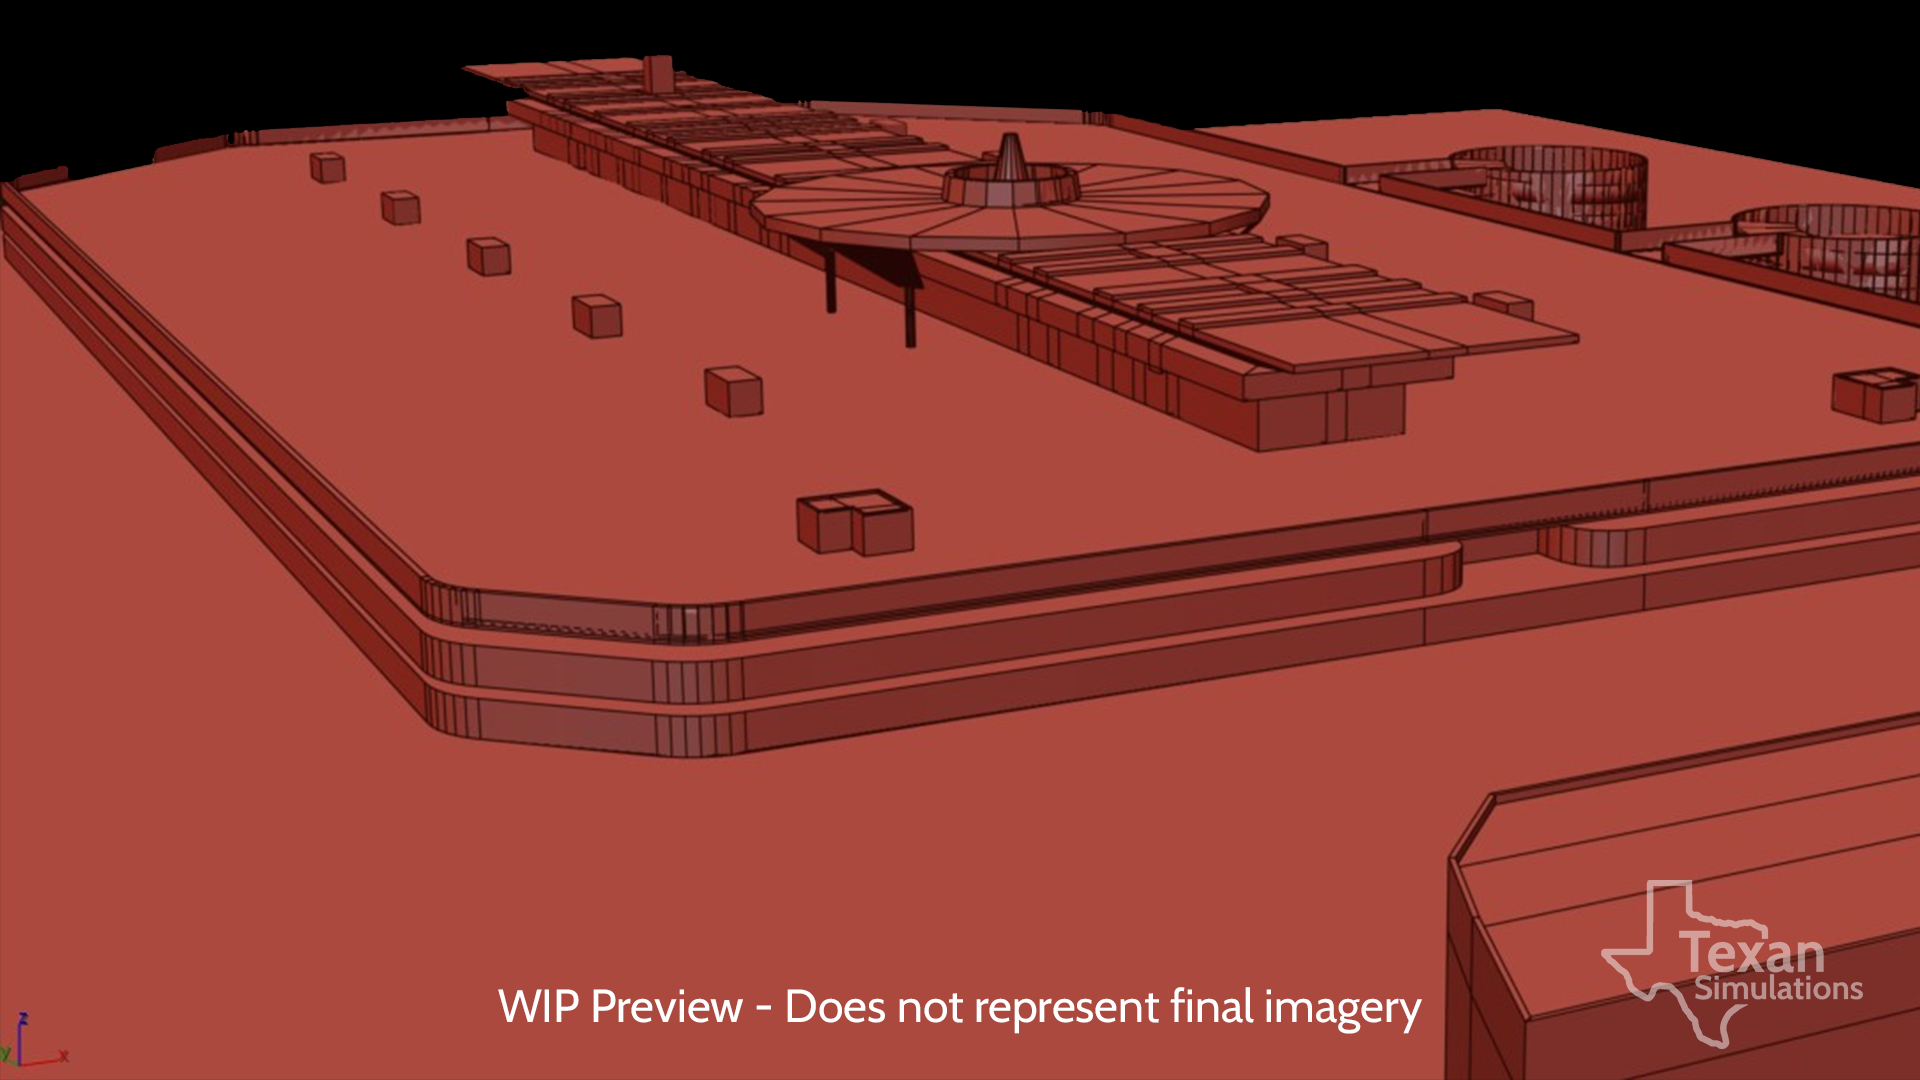 A red, untextured 3D model of a parking garage, with a VOR array on top.